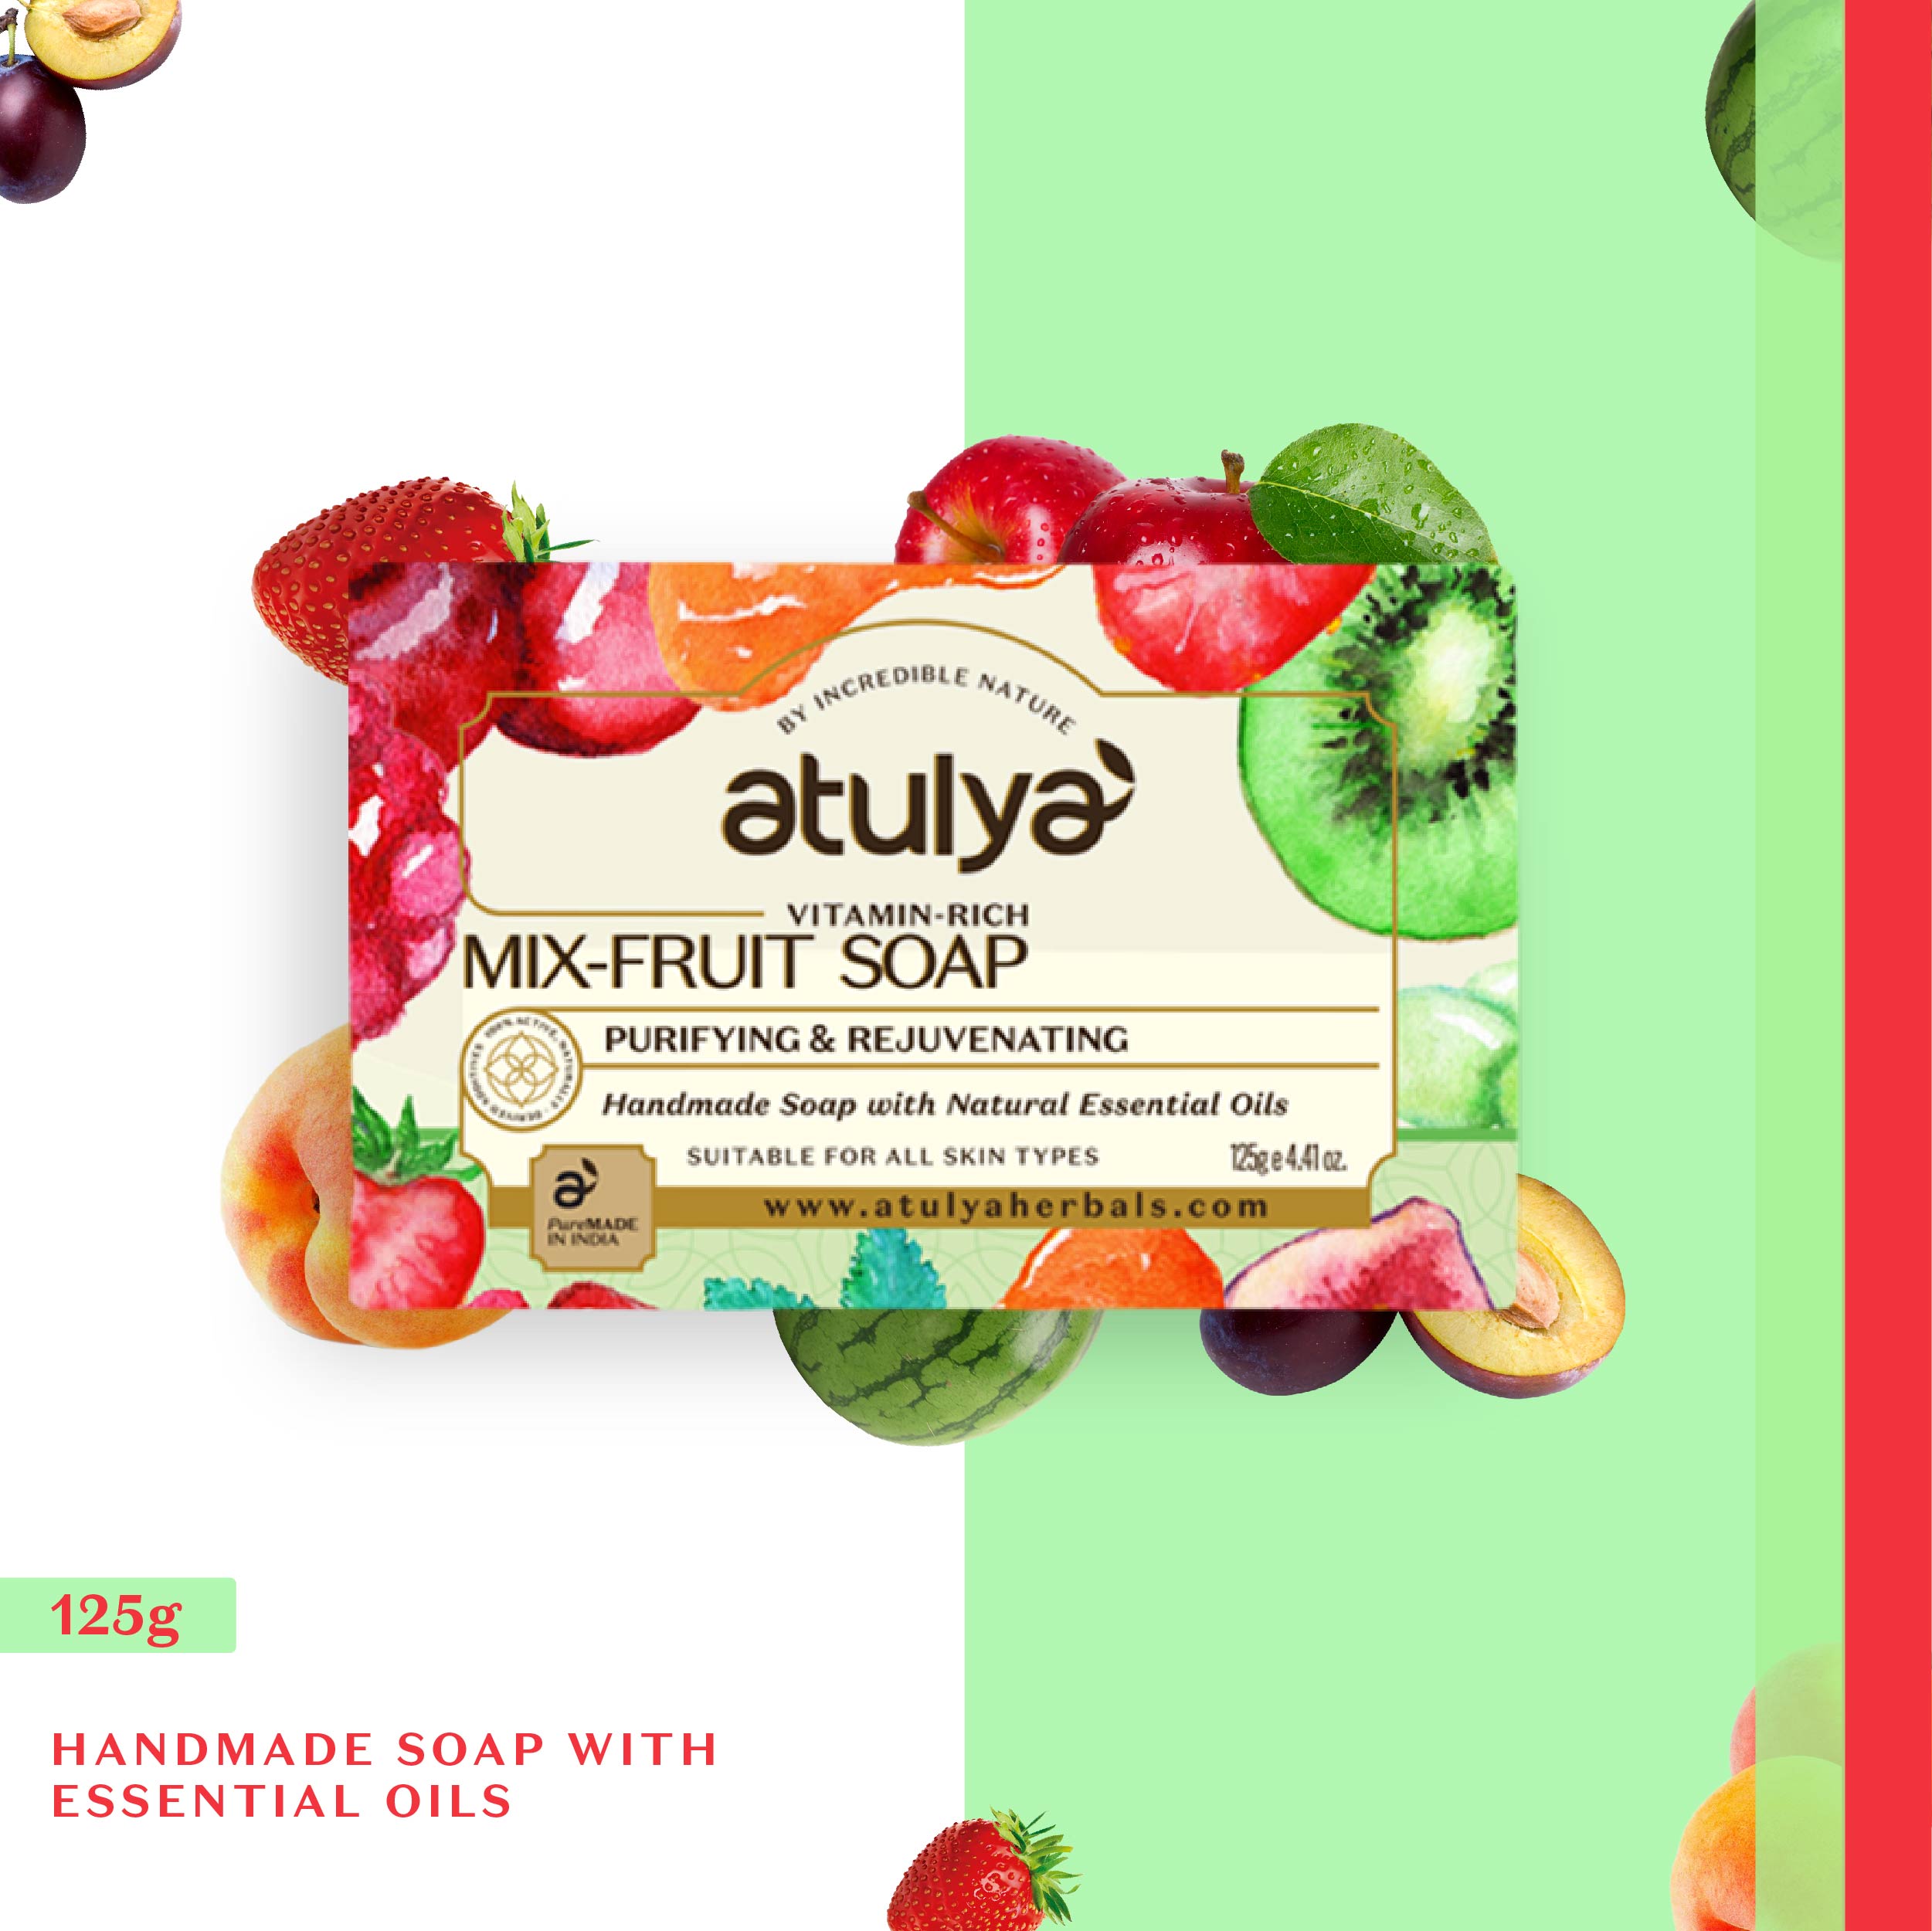 Atulya Vitamin- Rich Mix Fruit Soap - Handmade Soap with Natural Essential Oils